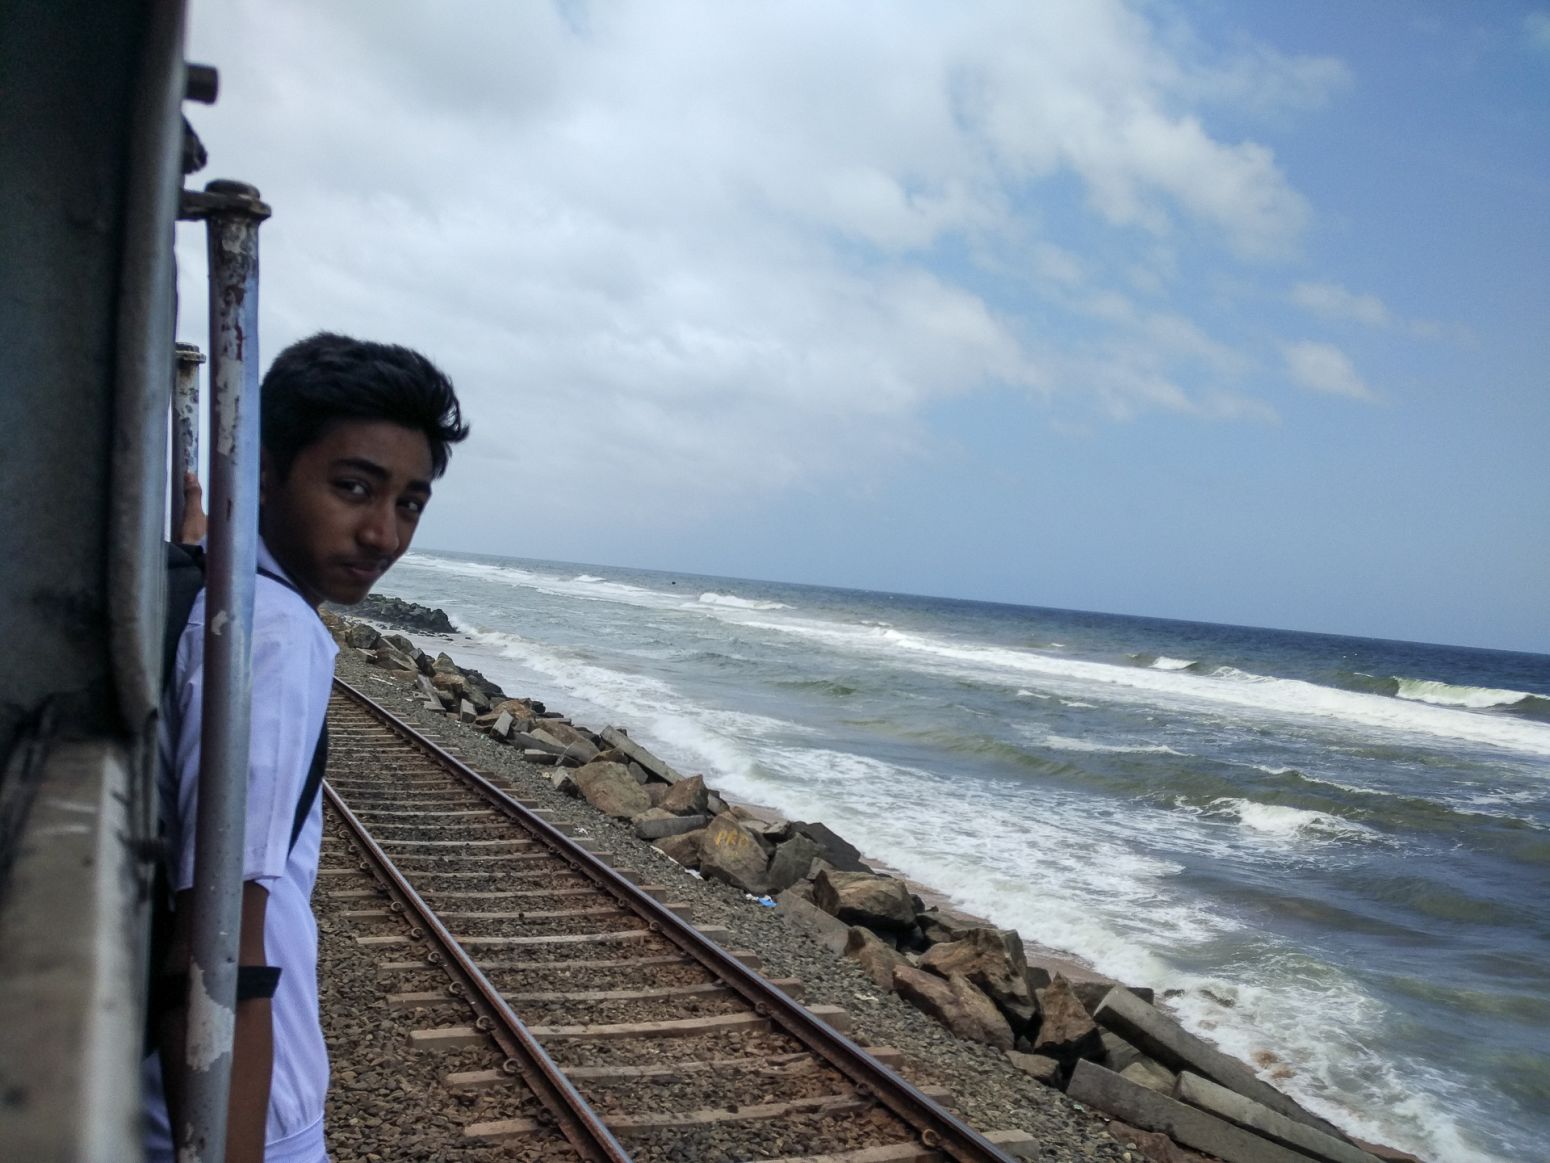 A boy travelling on the train between Colombo and Galle, Sri Lanka